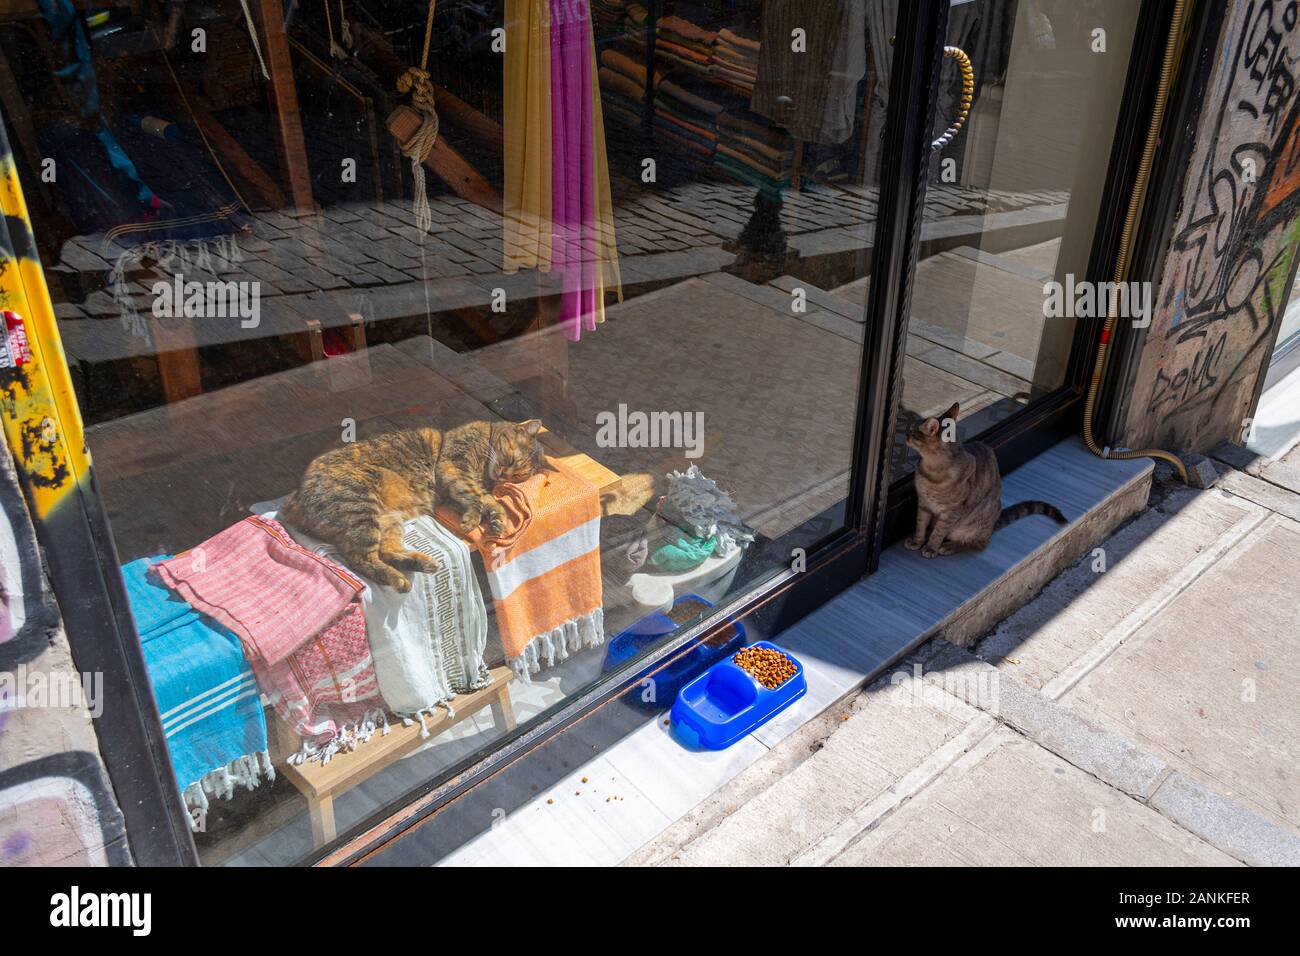 One cat lounges in the sun behind the window display as another waits at the door to come in a shop in Istanbul. Stock Photo